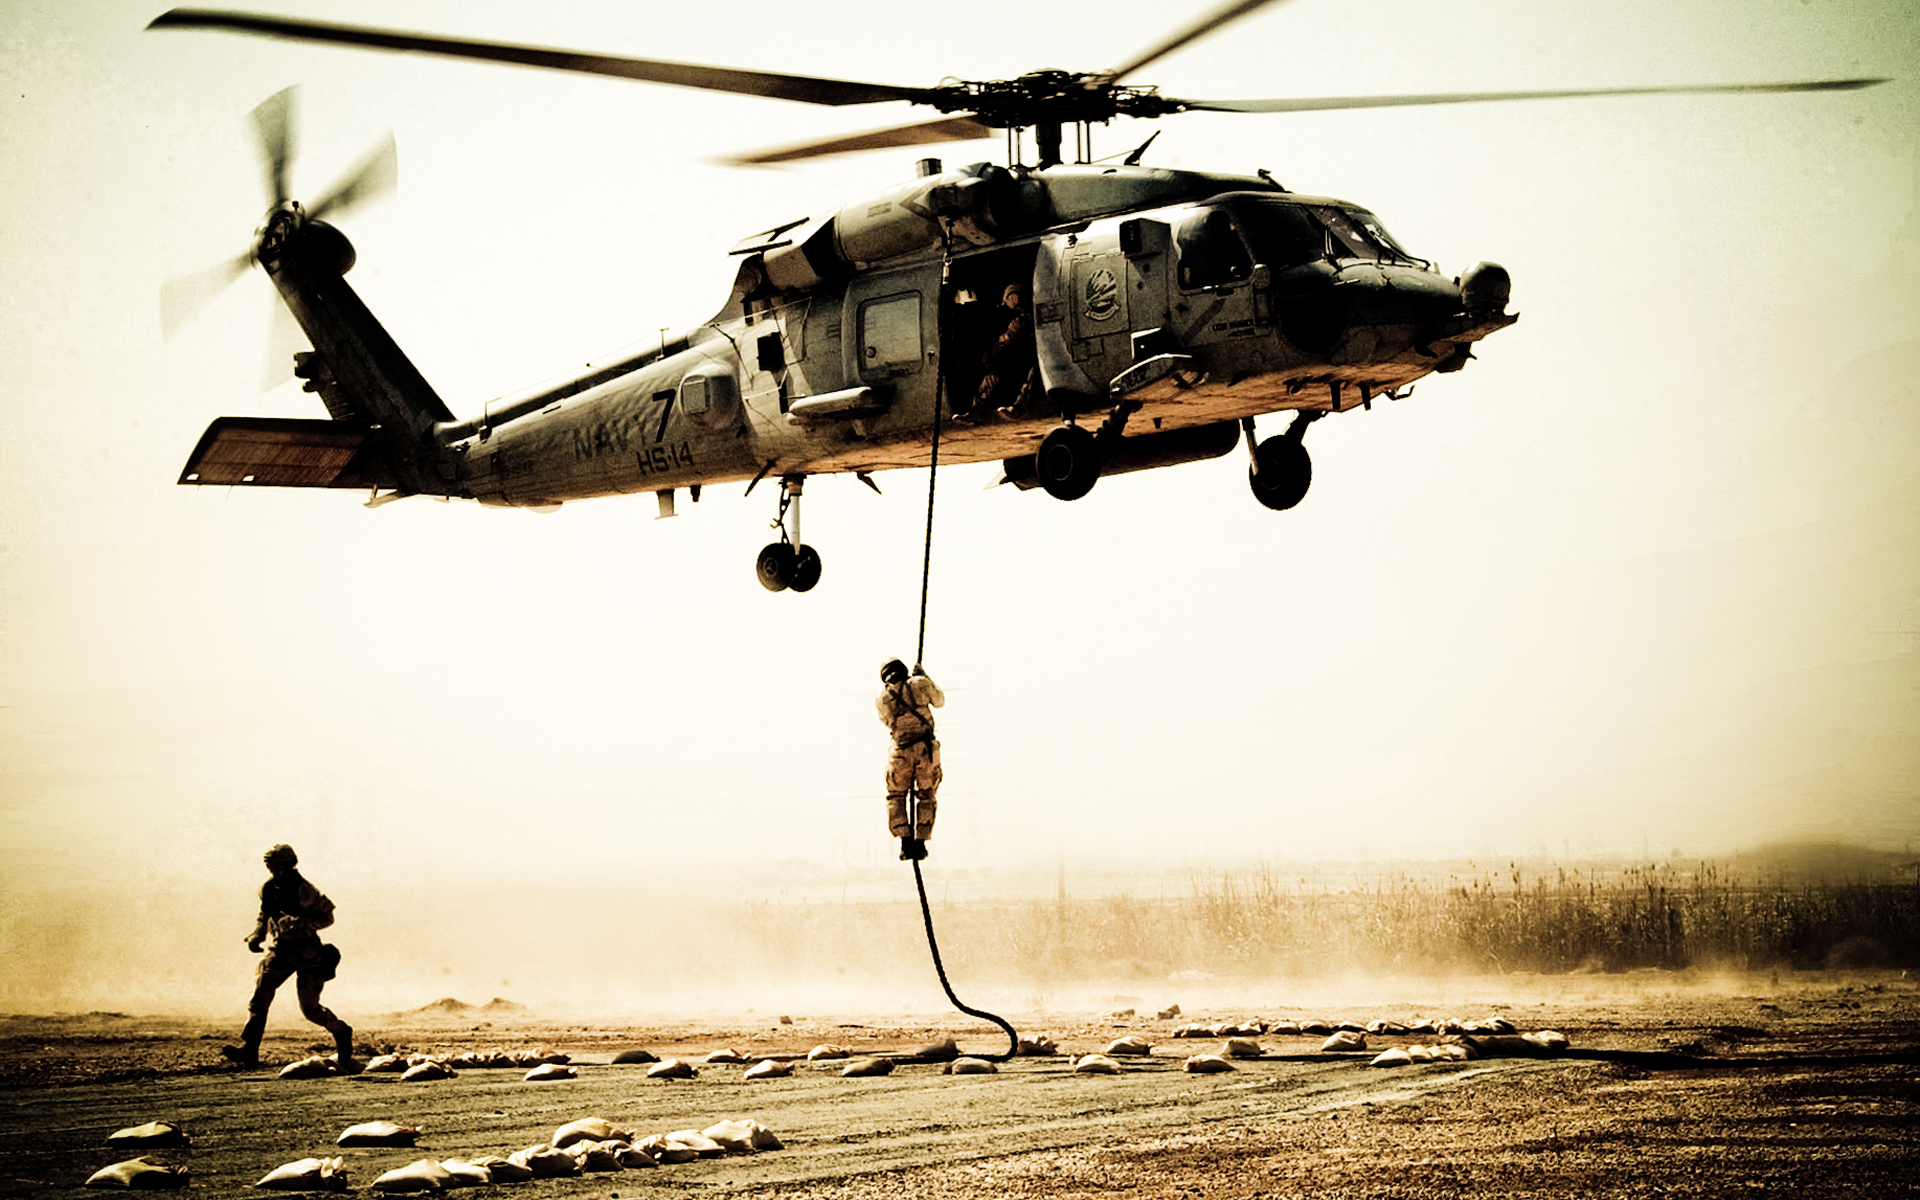 black hawk down, Drama, History, War, Action, Black, Hawk, Down, Military, Helicopter, Soldier Wallpaper